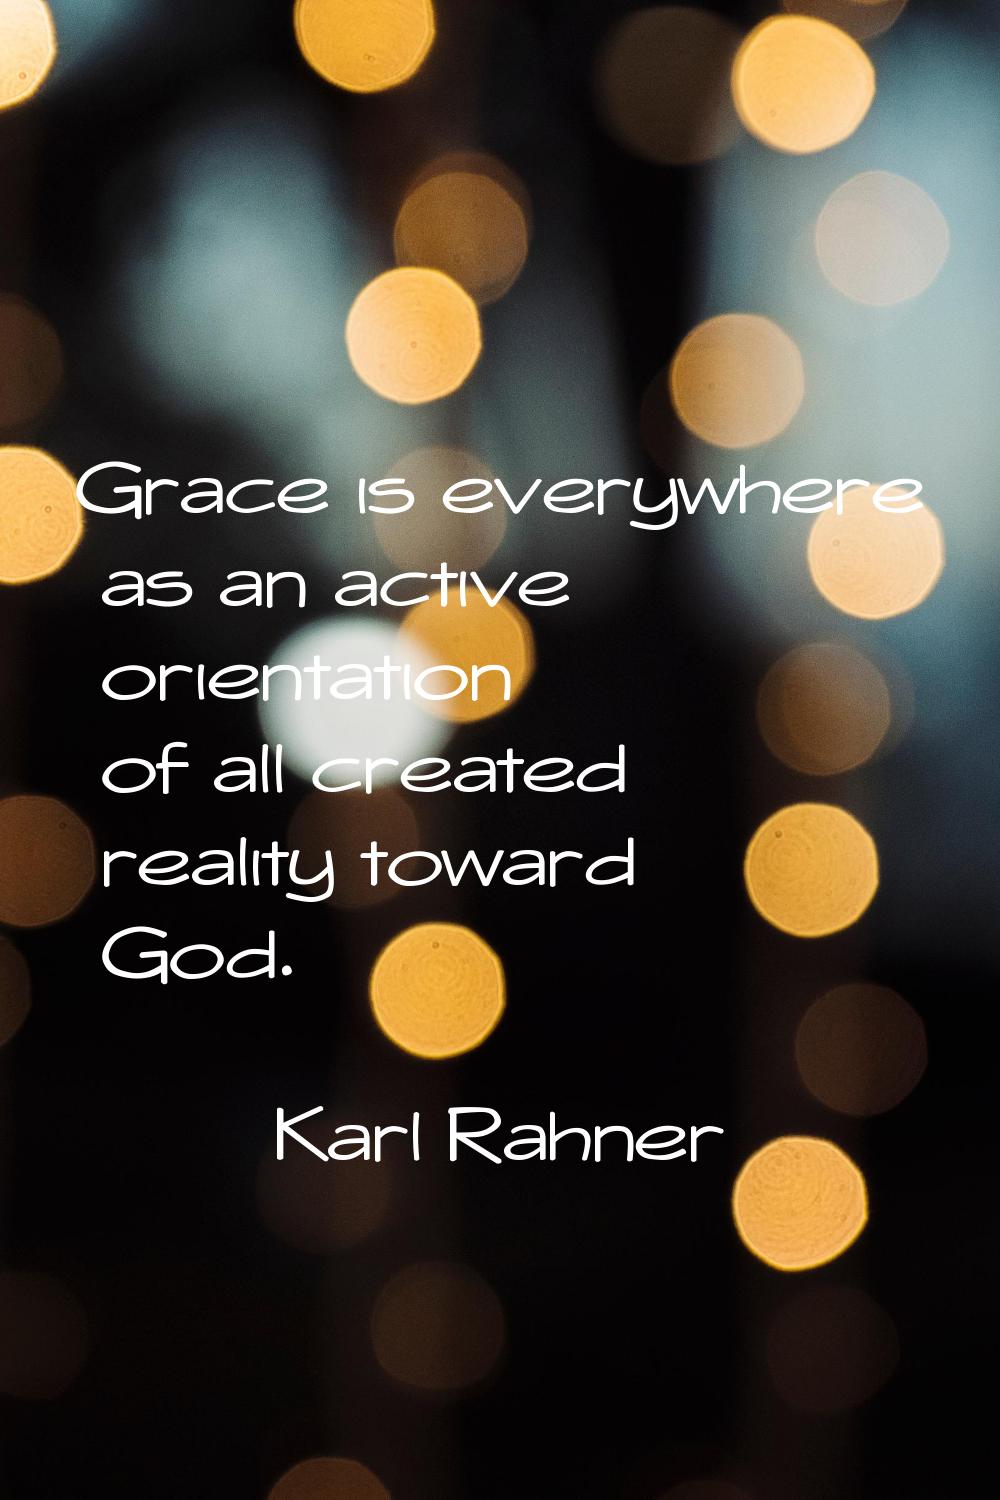 Grace is everywhere as an active orientation of all created reality toward God.